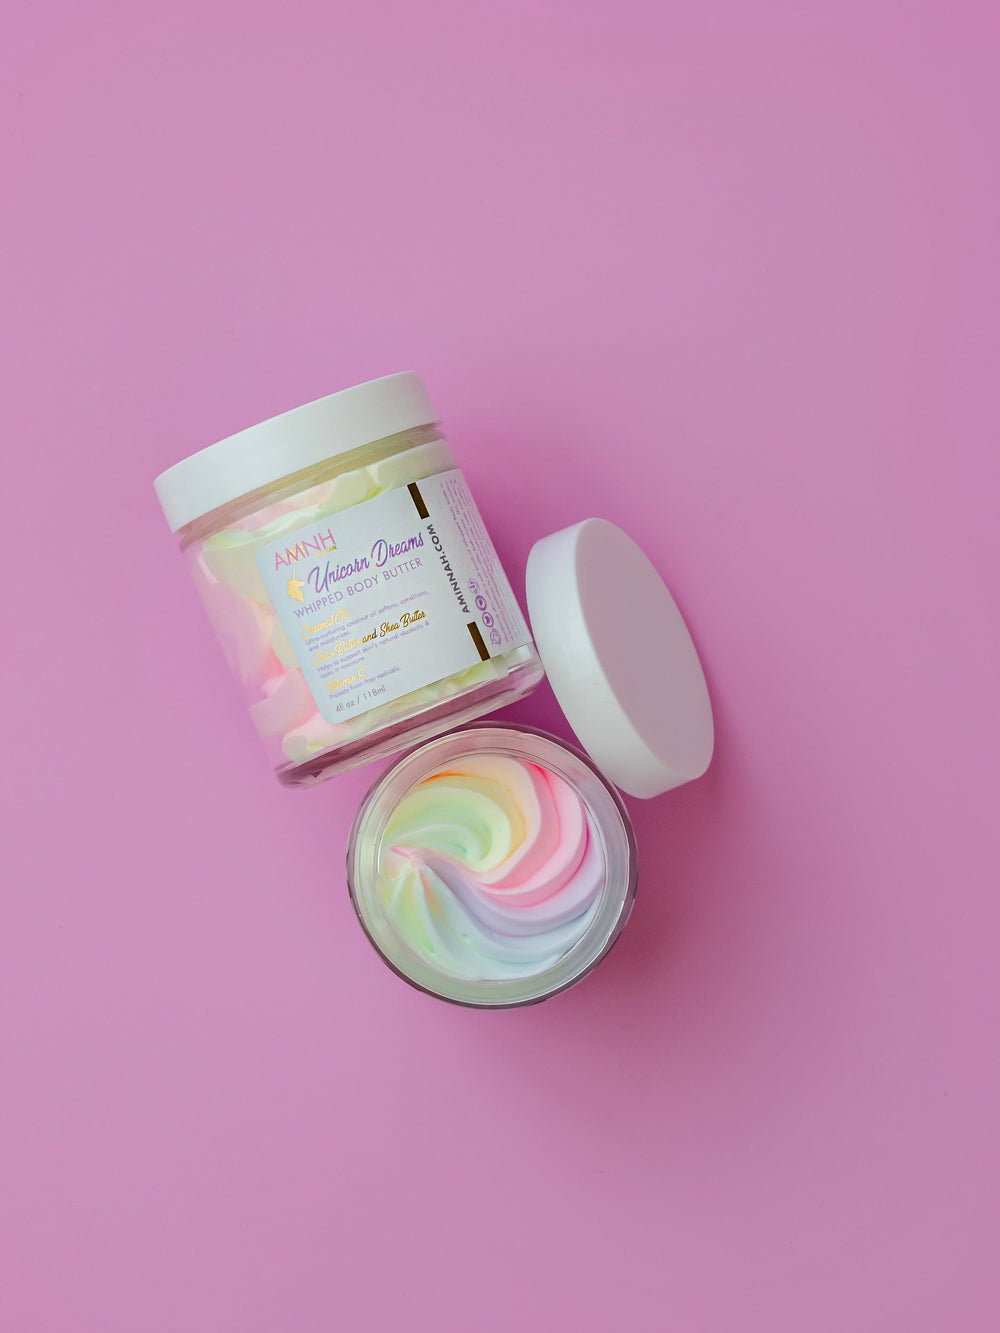 "Unicorn Dreams" Whipped Body Butter Personal Care AMINNAH 4oz 